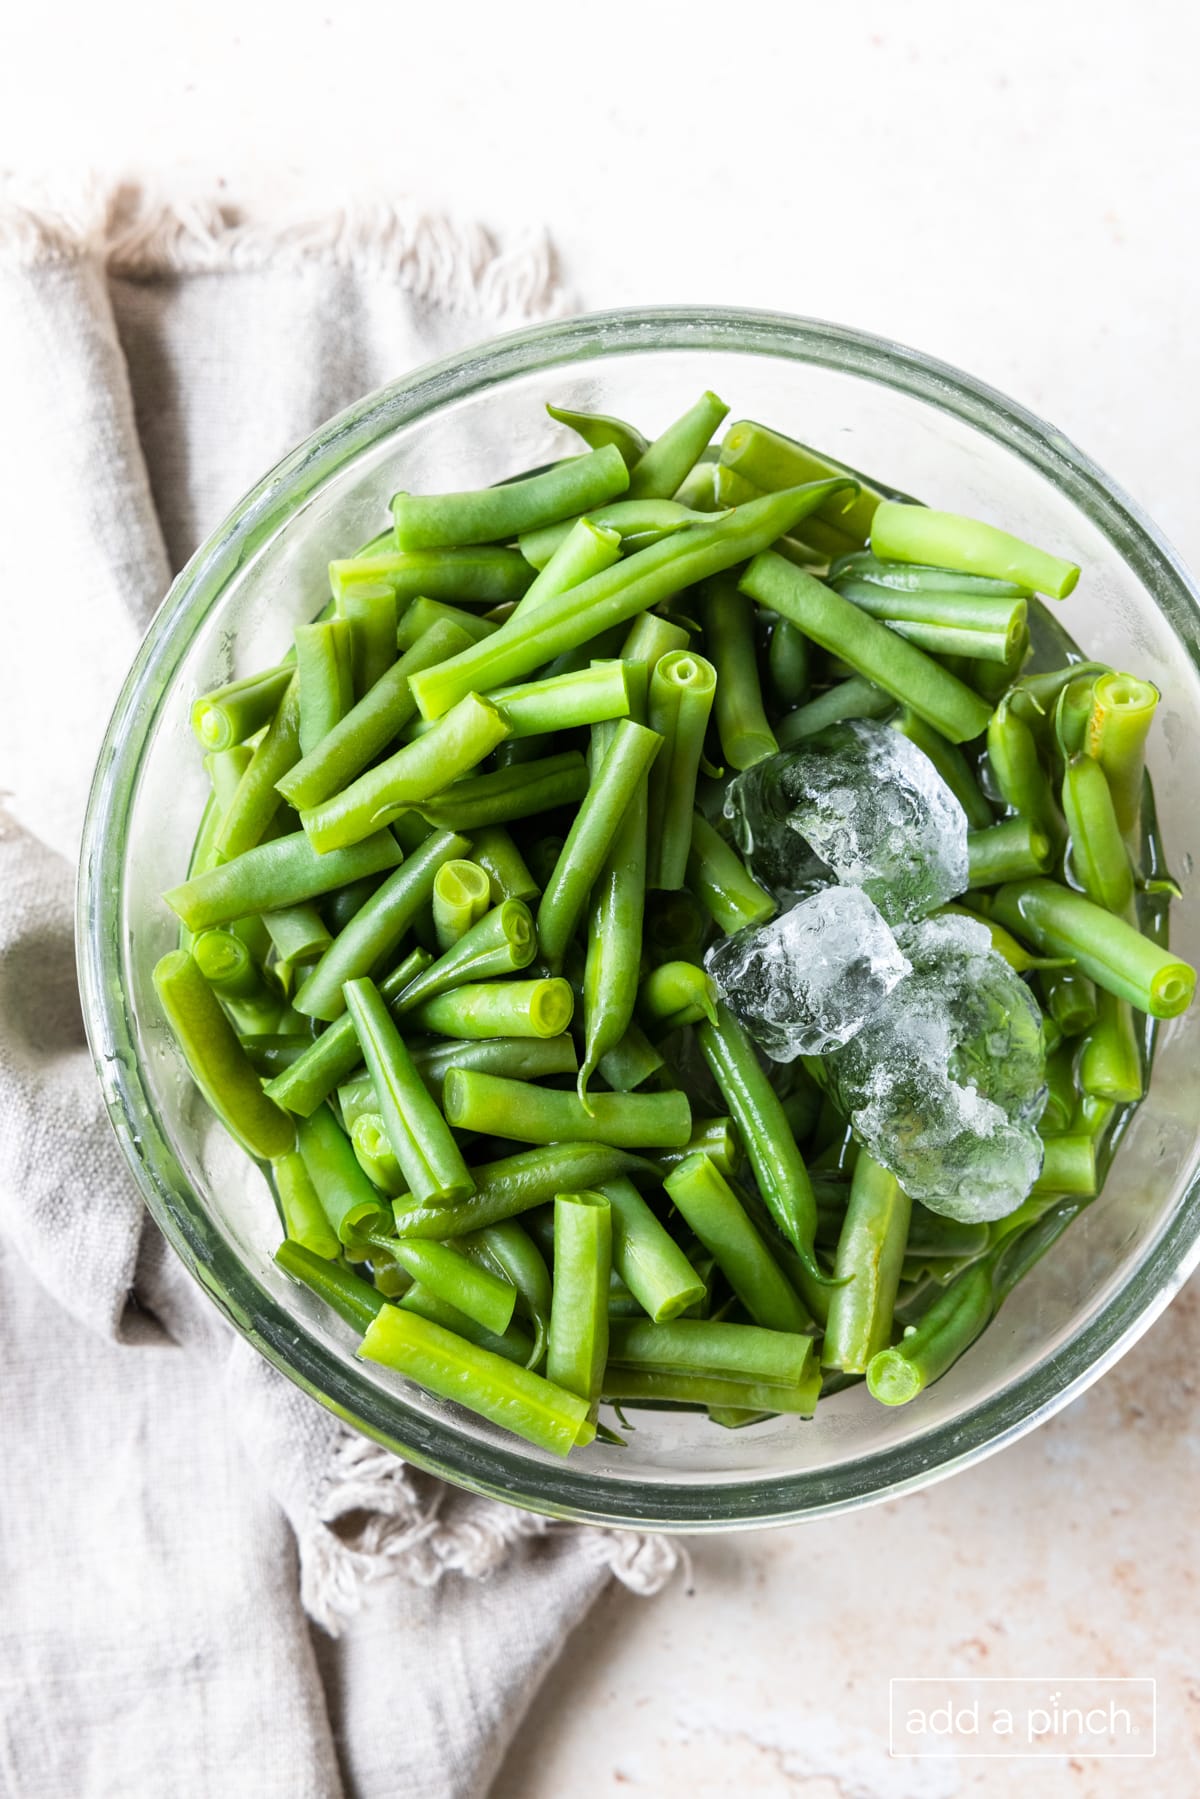 Fresh green beans in a glass bowl with ice.